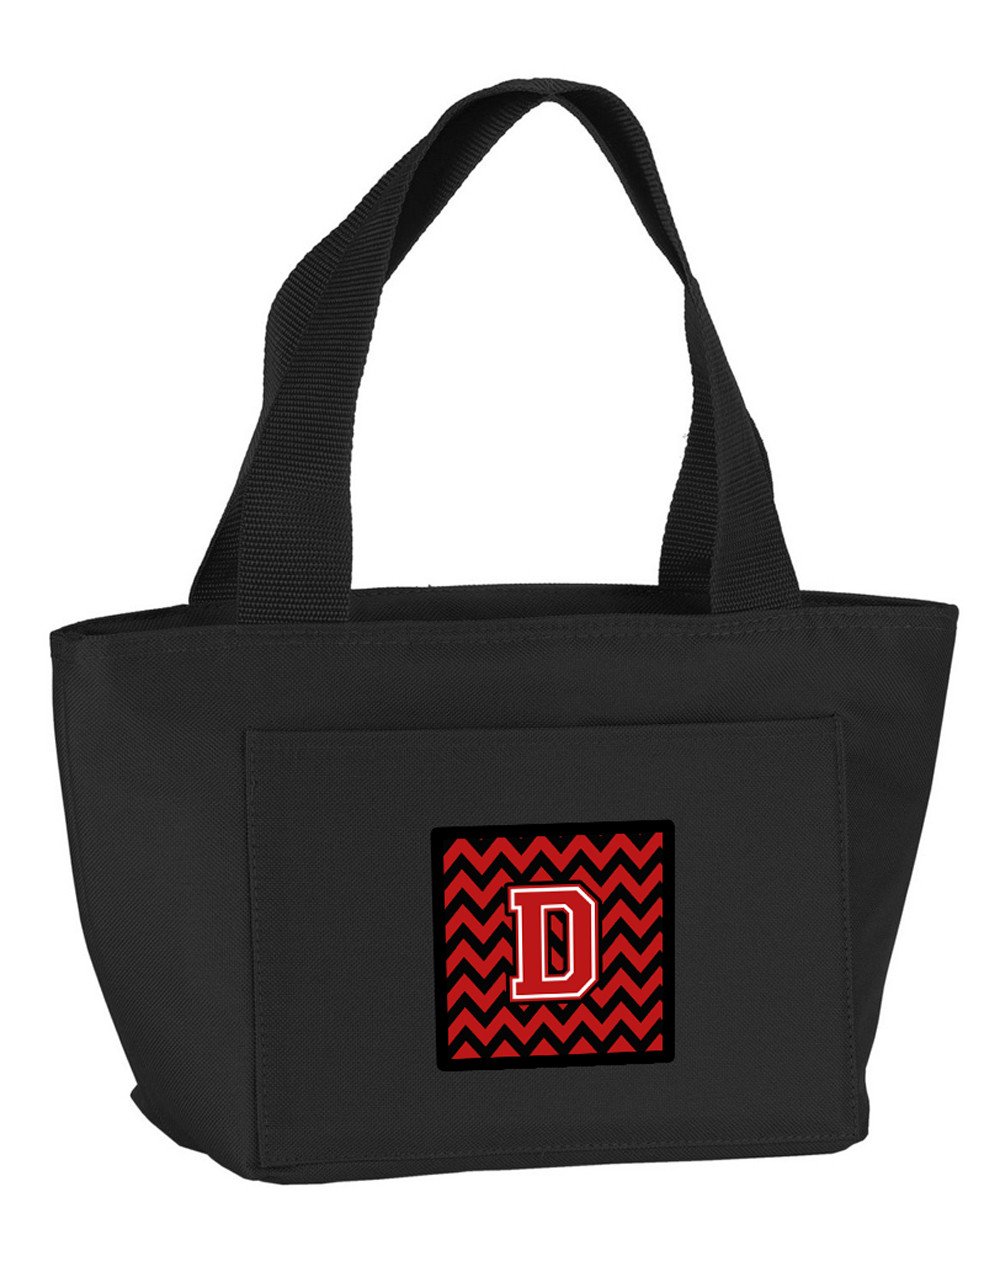 Letter D Chevron  Black and Red   Lunch Bag CJ1047-DBK-8808 by Caroline's Treasures